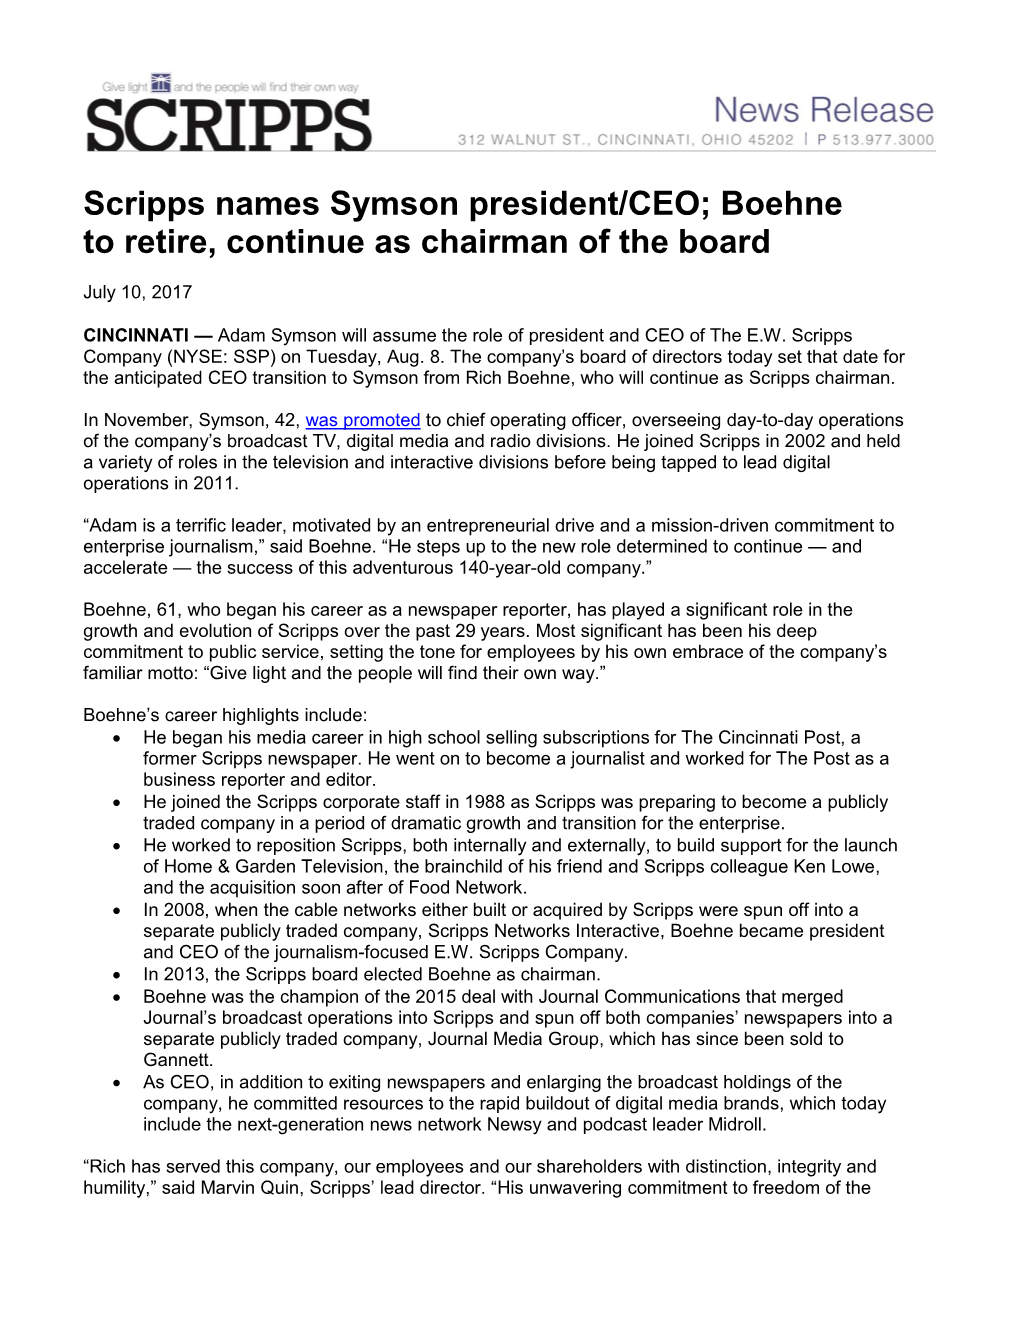 Scripps Names Symson President/CEO; Boehne to Retire, Continue As Chairman of the Board